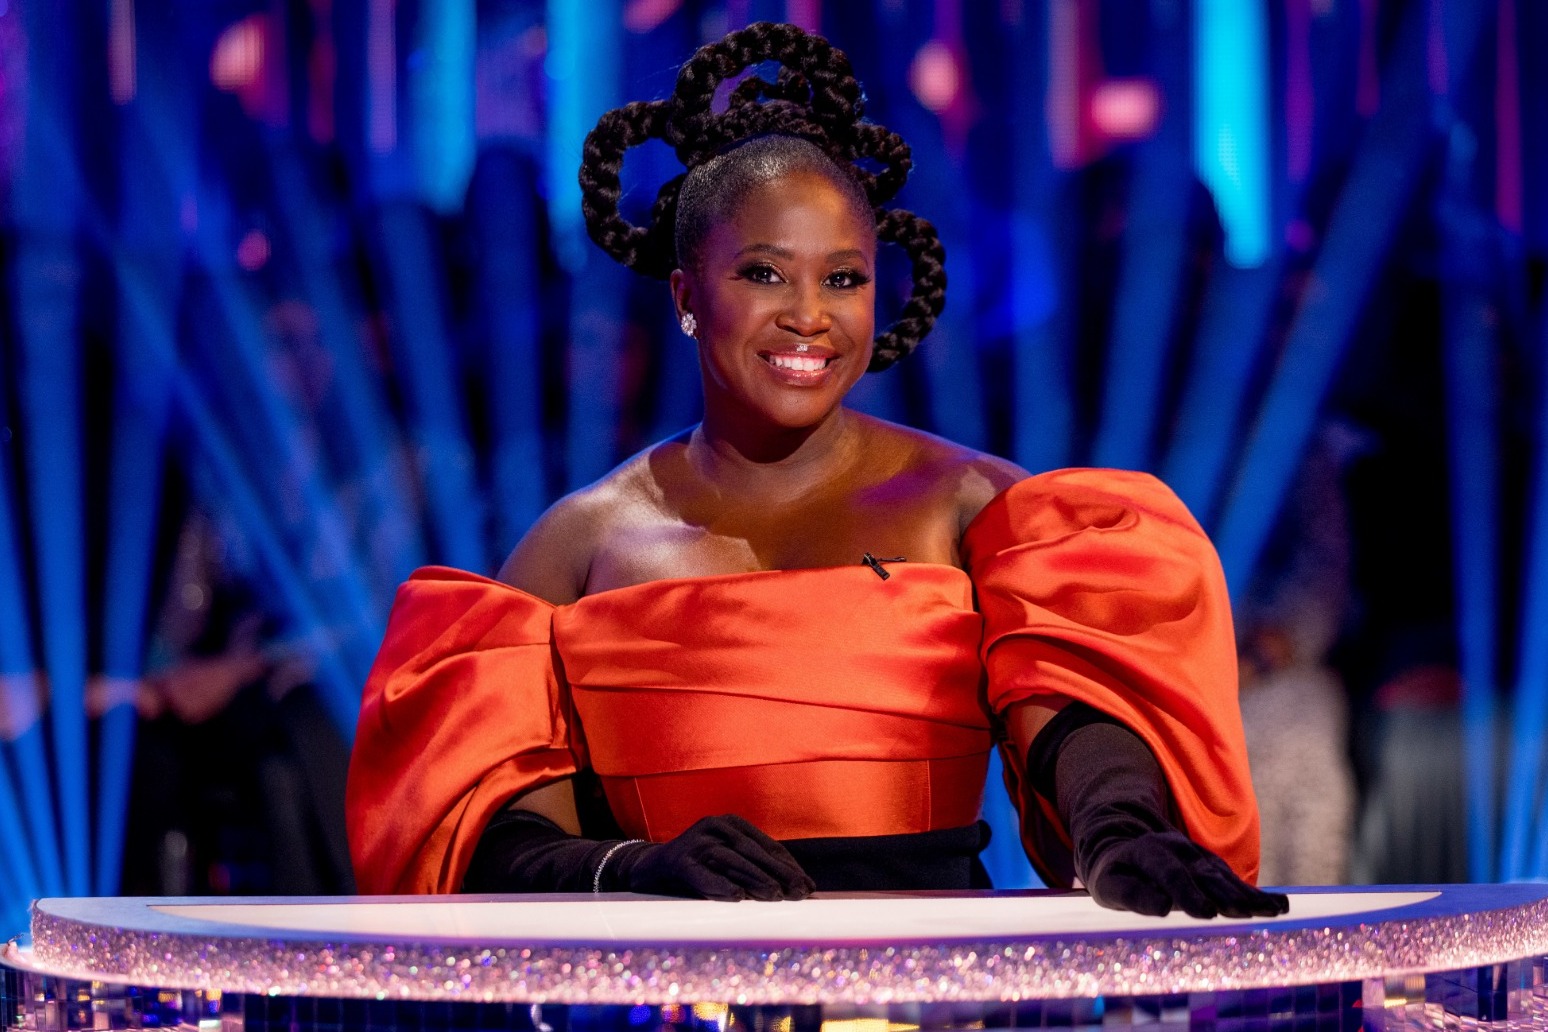 Motsi Mabuse reflects on ‘traumatising’ experience growing up in South Africa 